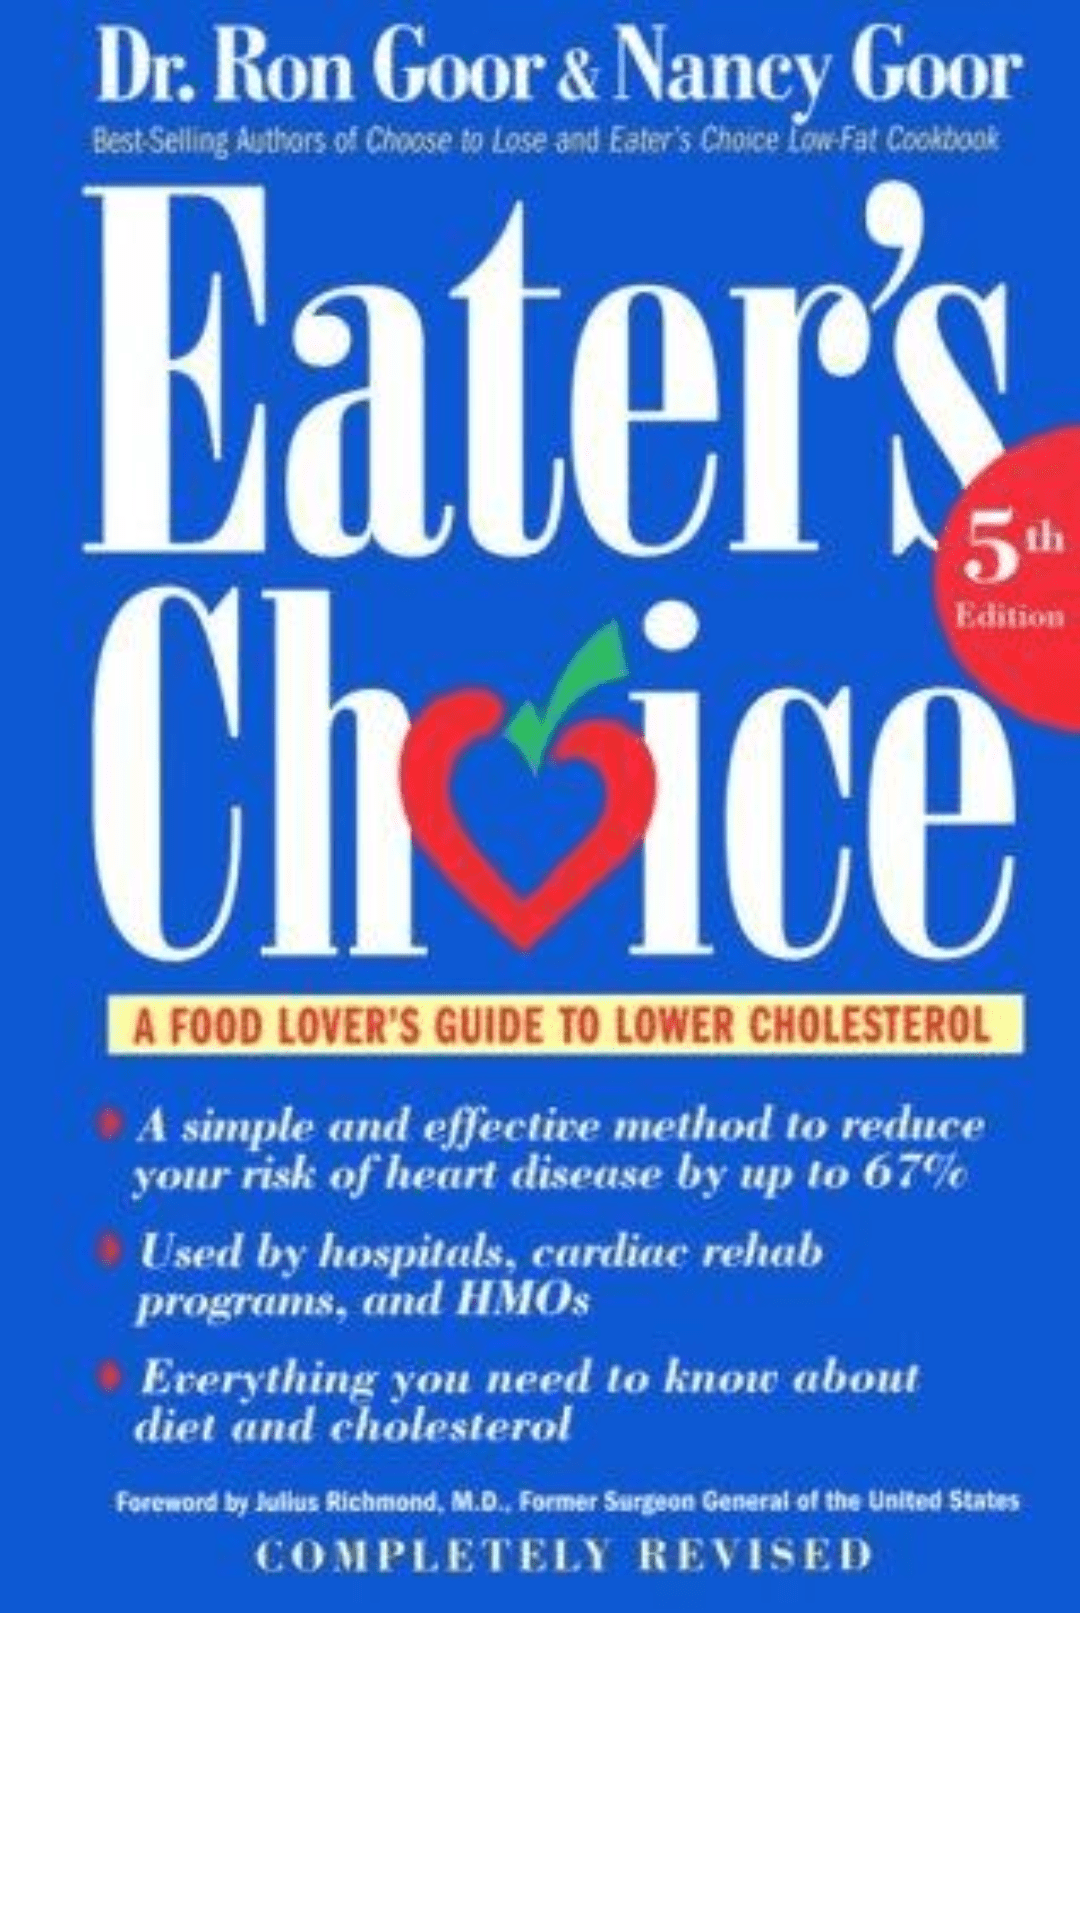 Eater's Choice by Ron Goor